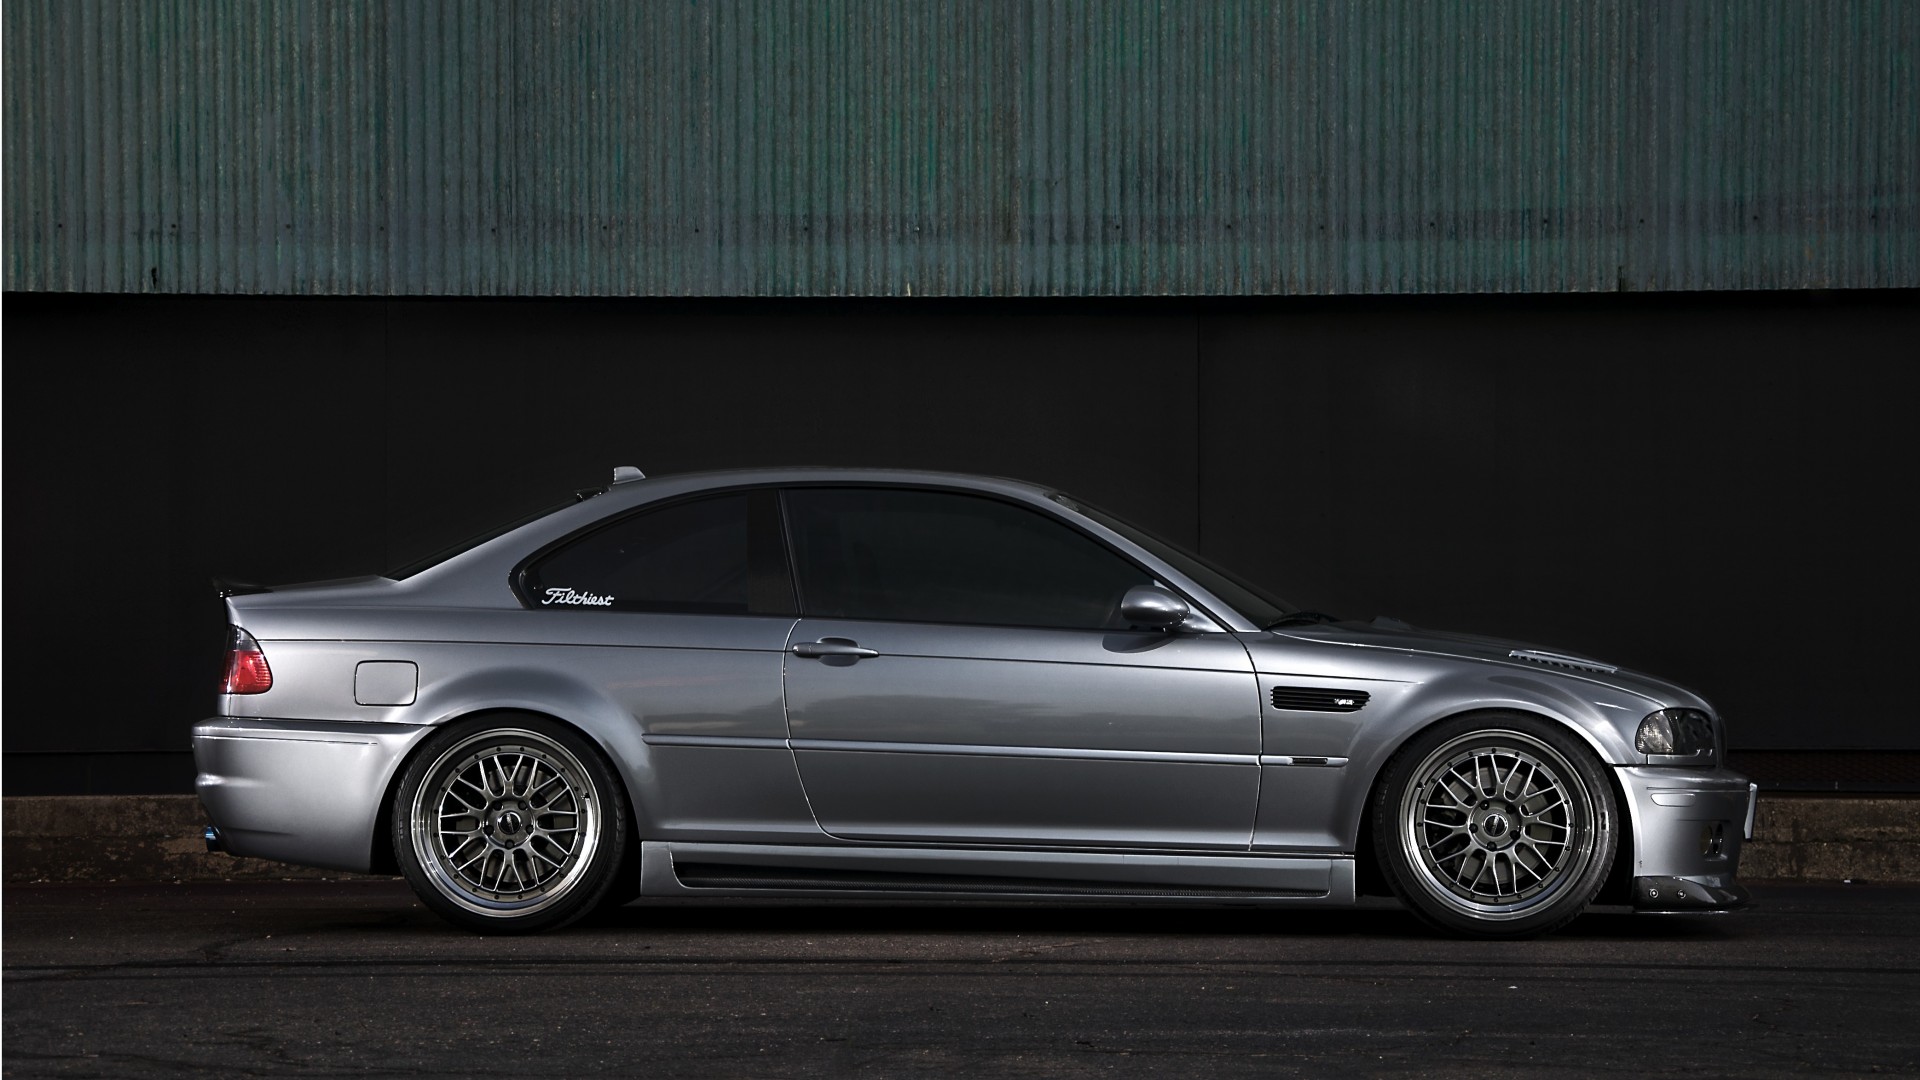 Download wallpaper 938x1668 bmw m3 e46 black side view iphone 876s6  for parallax hd background